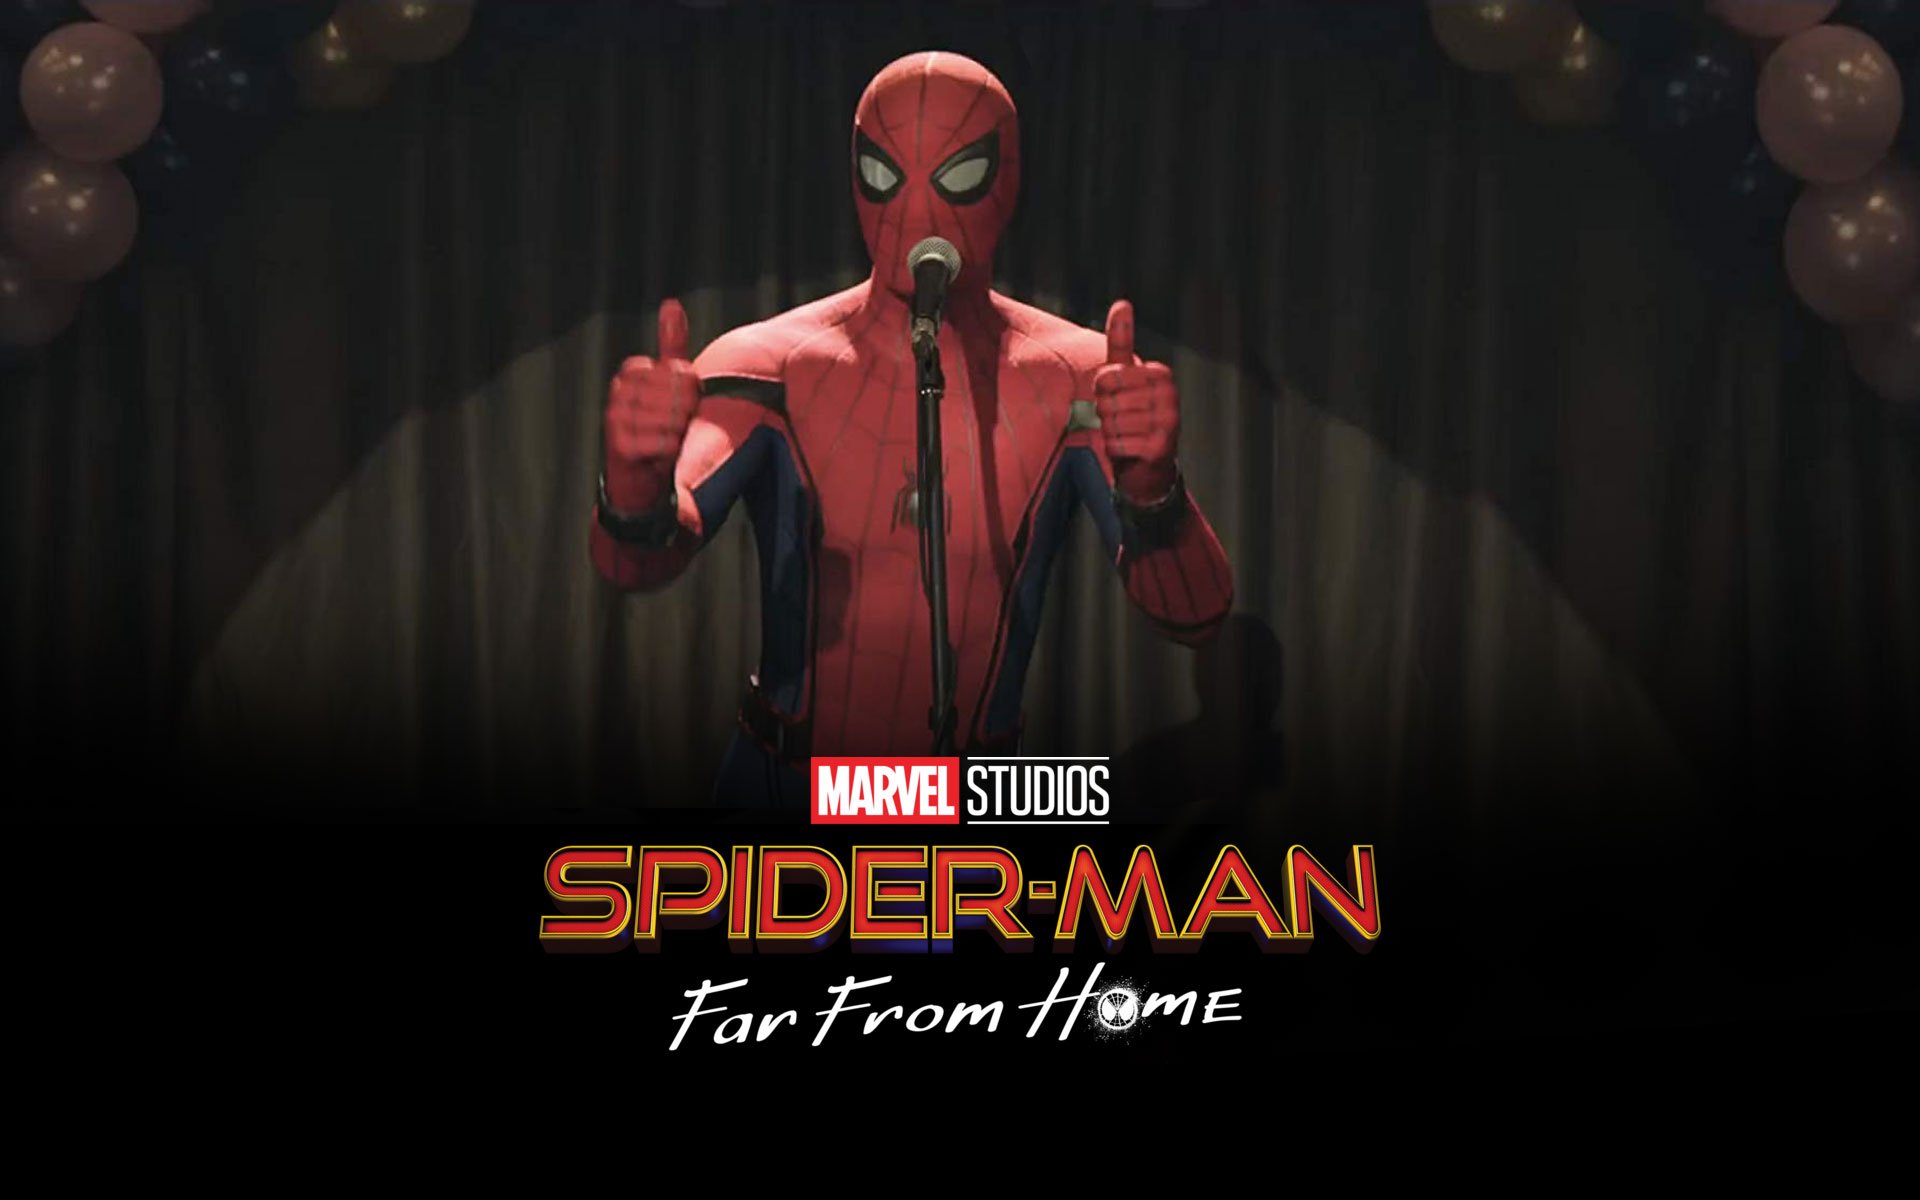 Spider Man Far From Home Movie 2019 Wallpapers Hd Cast Release Images, Photos, Reviews